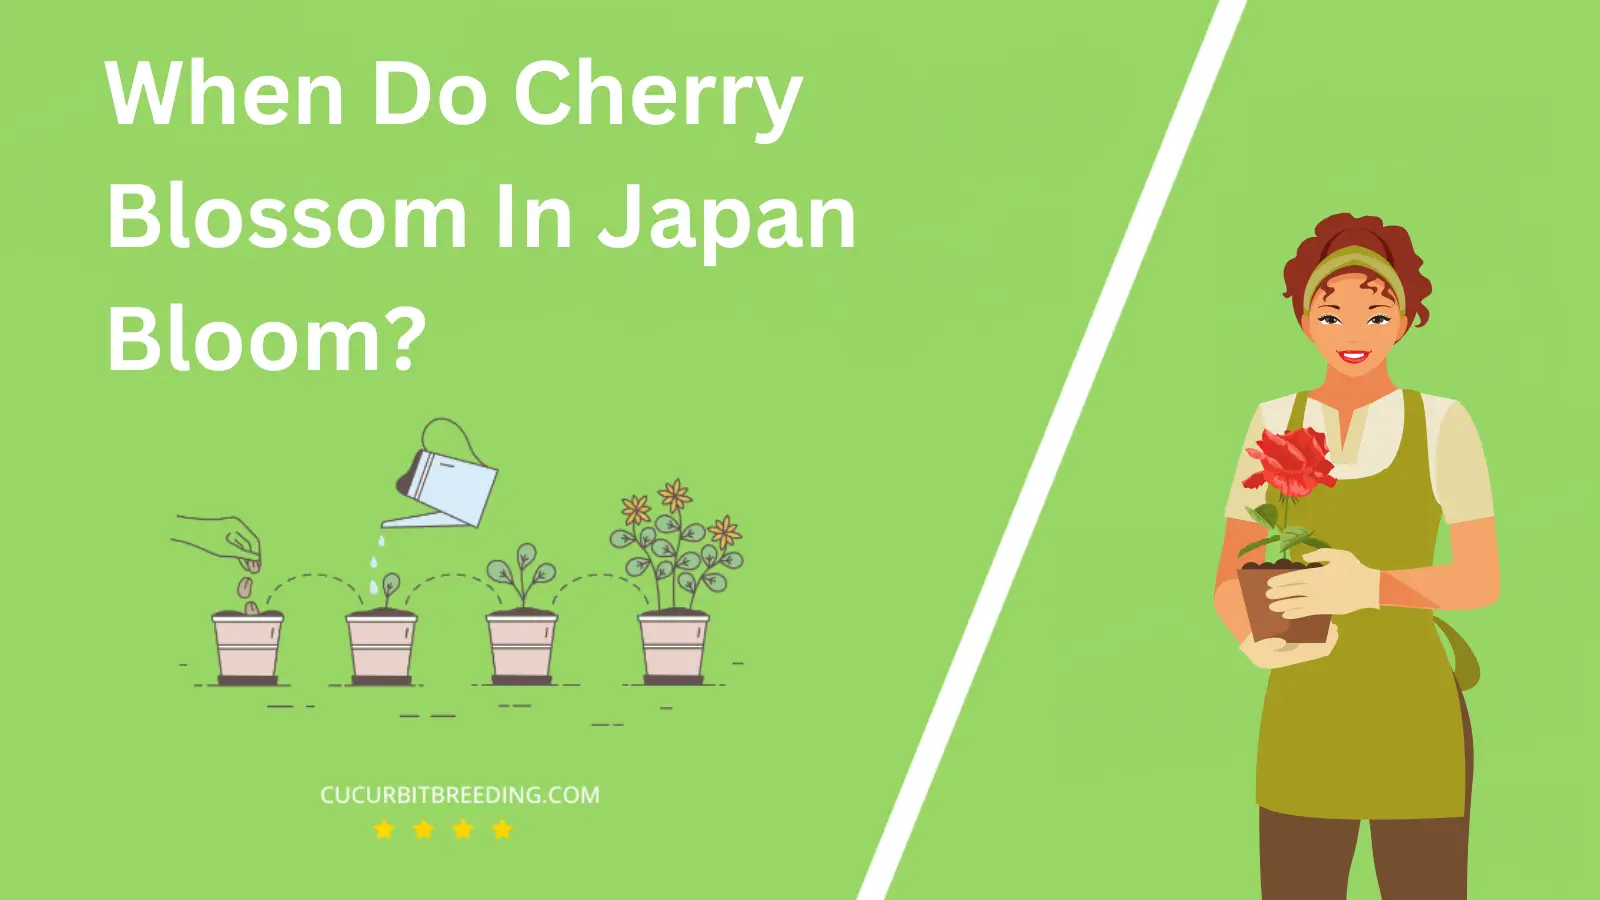 When Do Cherry Blossom In Japan Bloom?